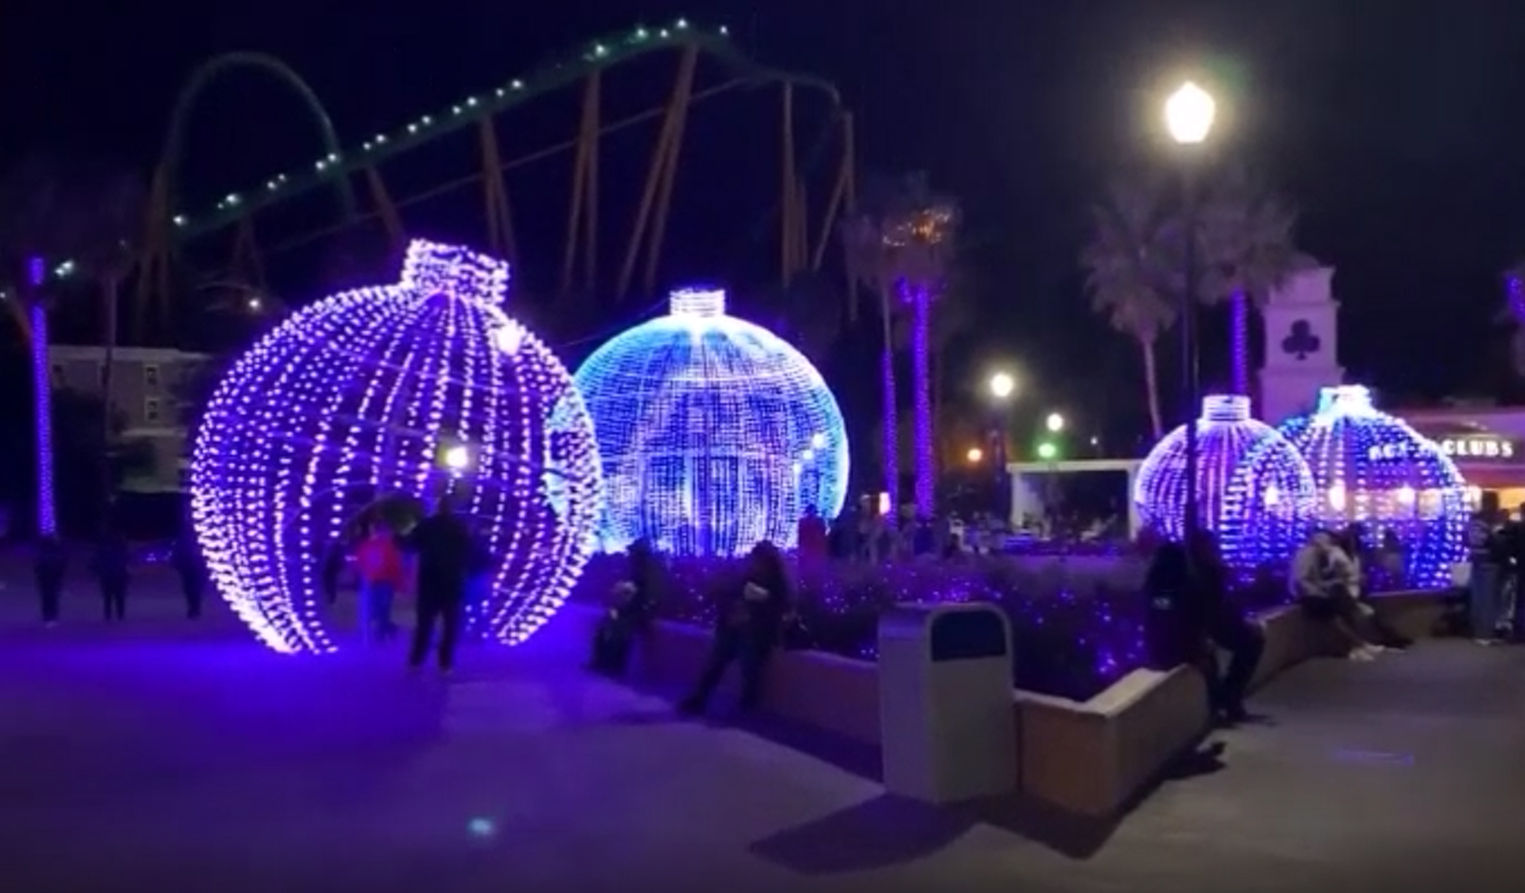 Giant Ornaments by Universal Concepts